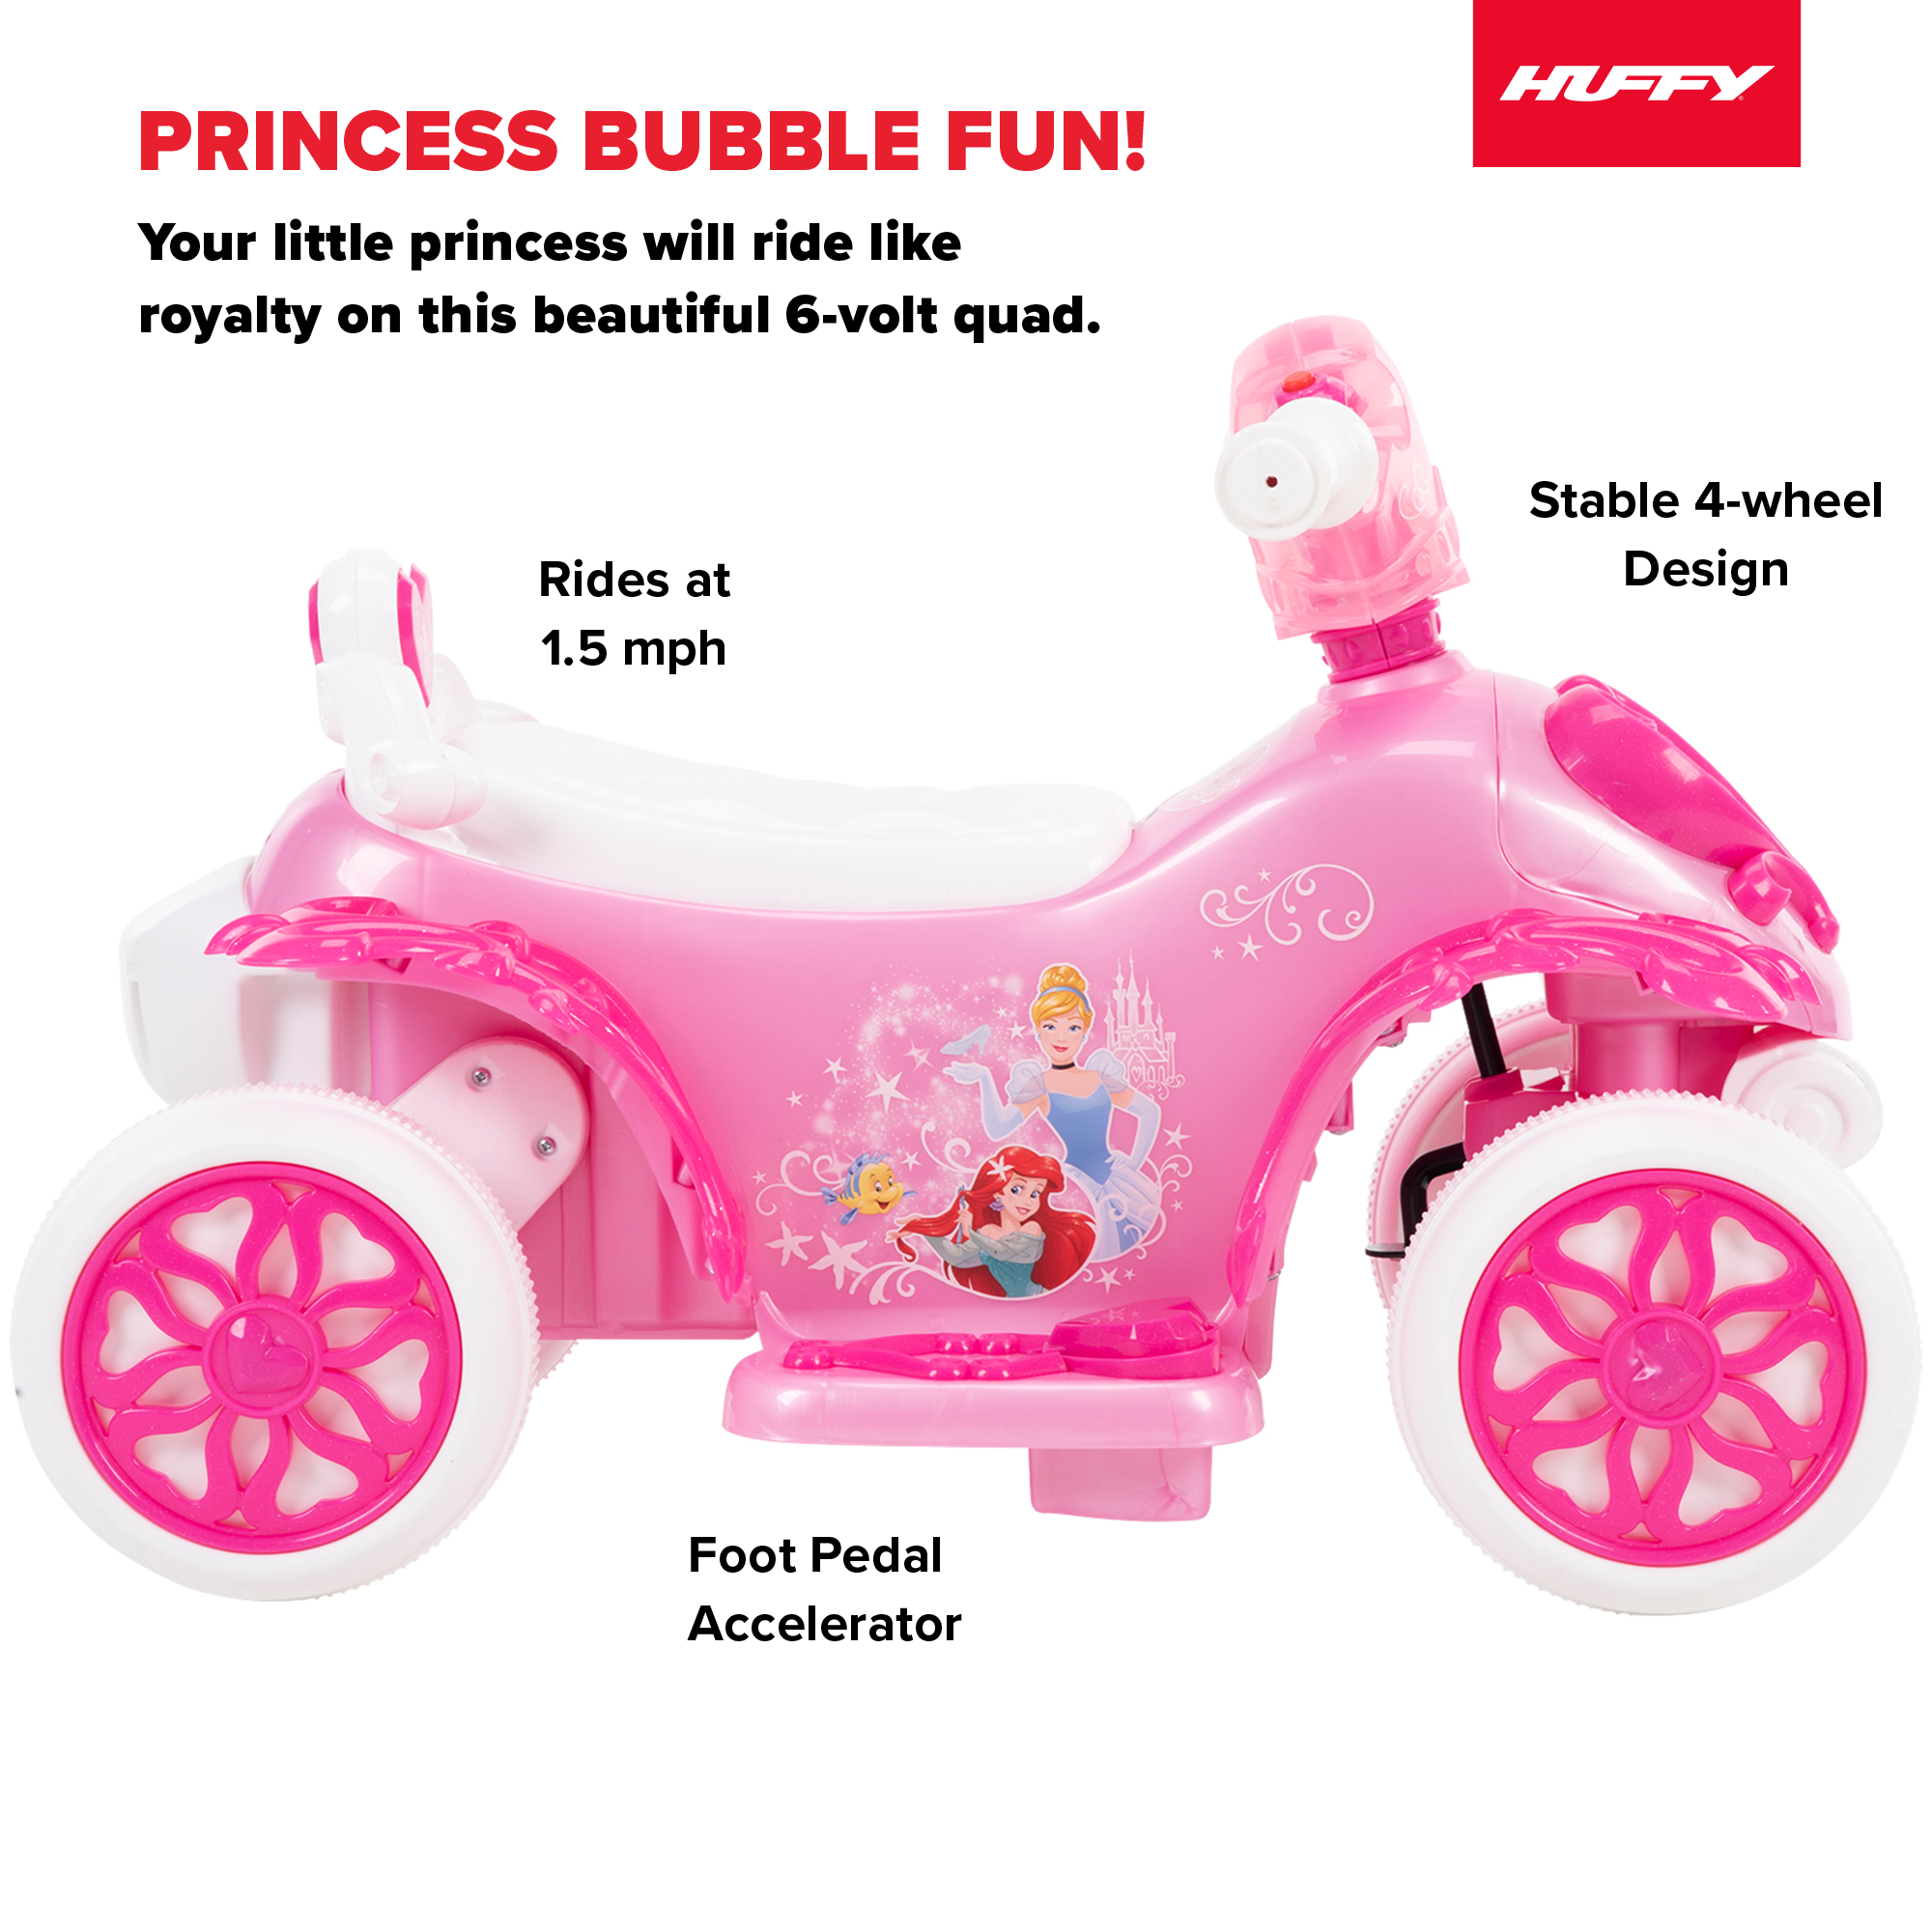 Disney Princess Electric Ride-on Quad, for Children ages 18 months+,  by Huffy - image 3 of 16